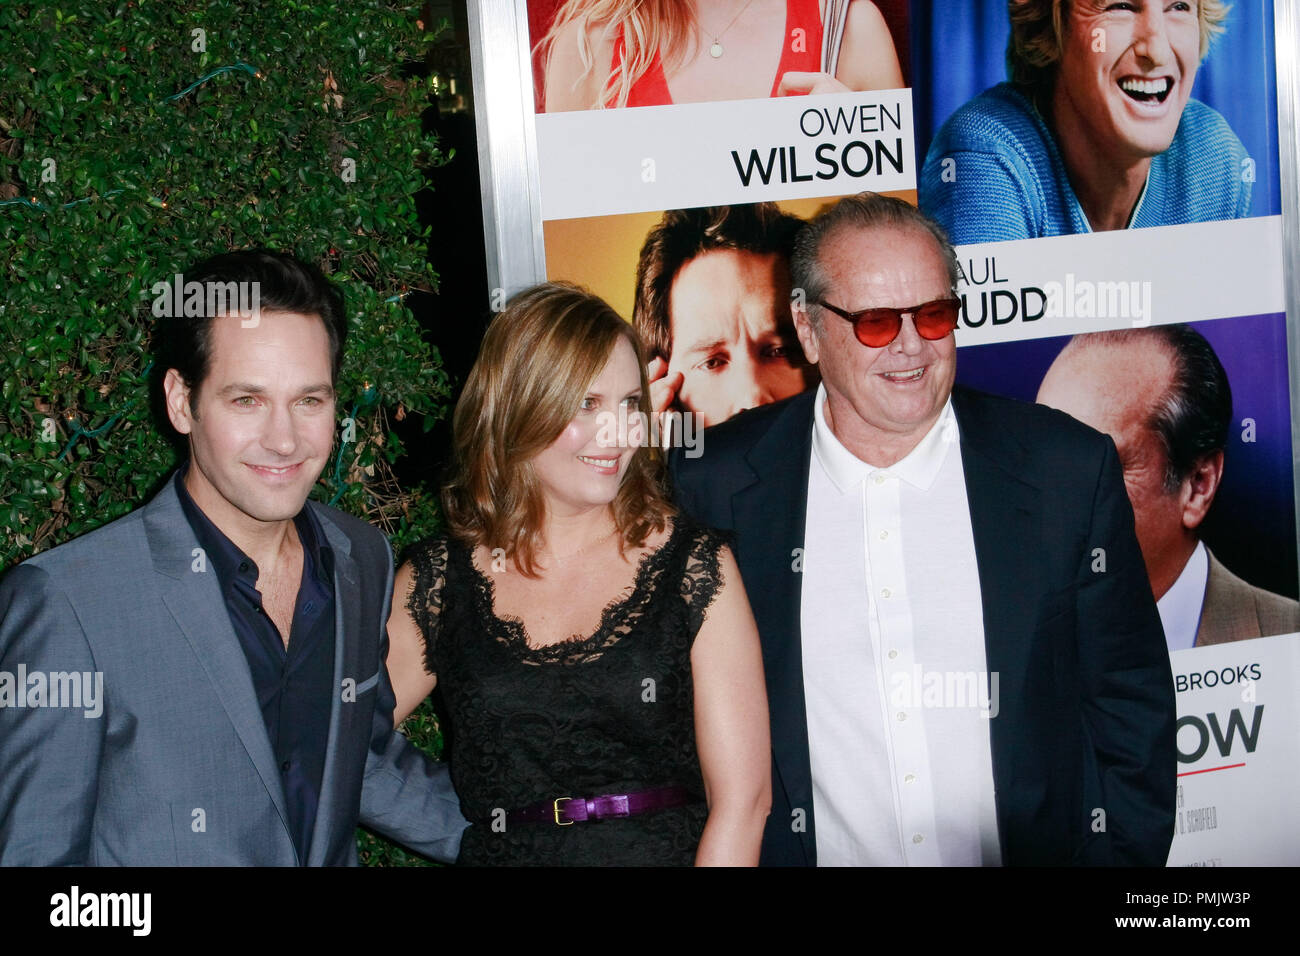 Paul Rudd, Julie Yaeger and Jack Nicholson at the Premiere of Sony Pictures' 'How Do You Know'. Arrivals held at Mann Village Theatre in Westwood, CA, December 13, 2010.  Photo by Joseph Martinez / PictureLux File Reference # 30759 049PLX   For Editorial Use Only -  All Rights Reserved Stock Photo